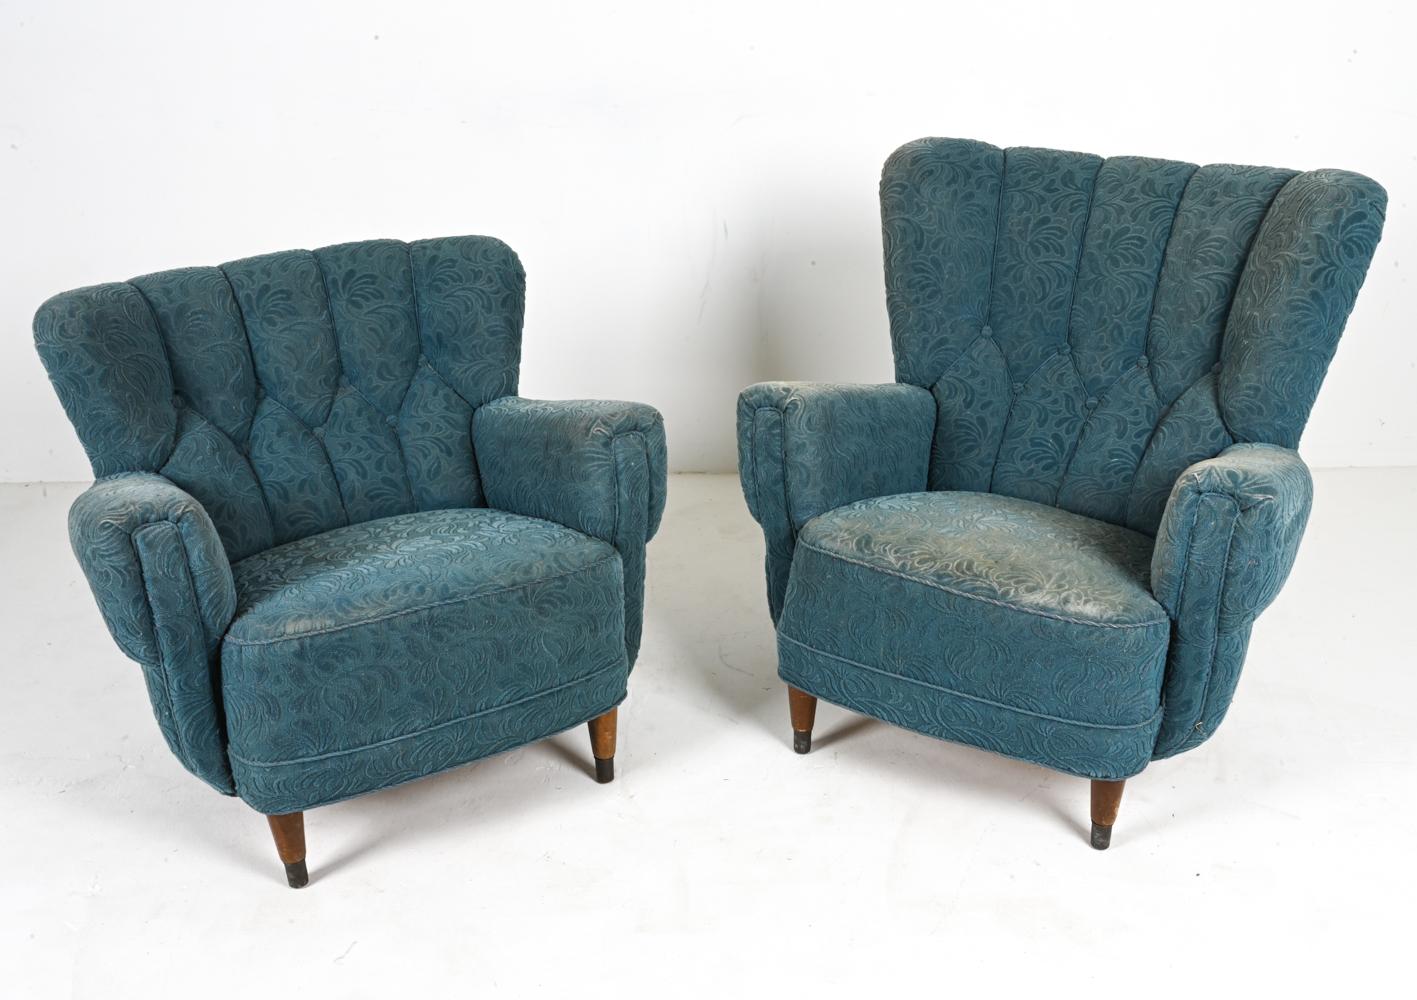 Whispering tales from an era gone by, this pair of Danish mid-century lounge chairs beckon you to a world where elegance was etched in every fiber and artistry arose from every curve. Drawing inspiration from the iconic style of Flemming Lassen,